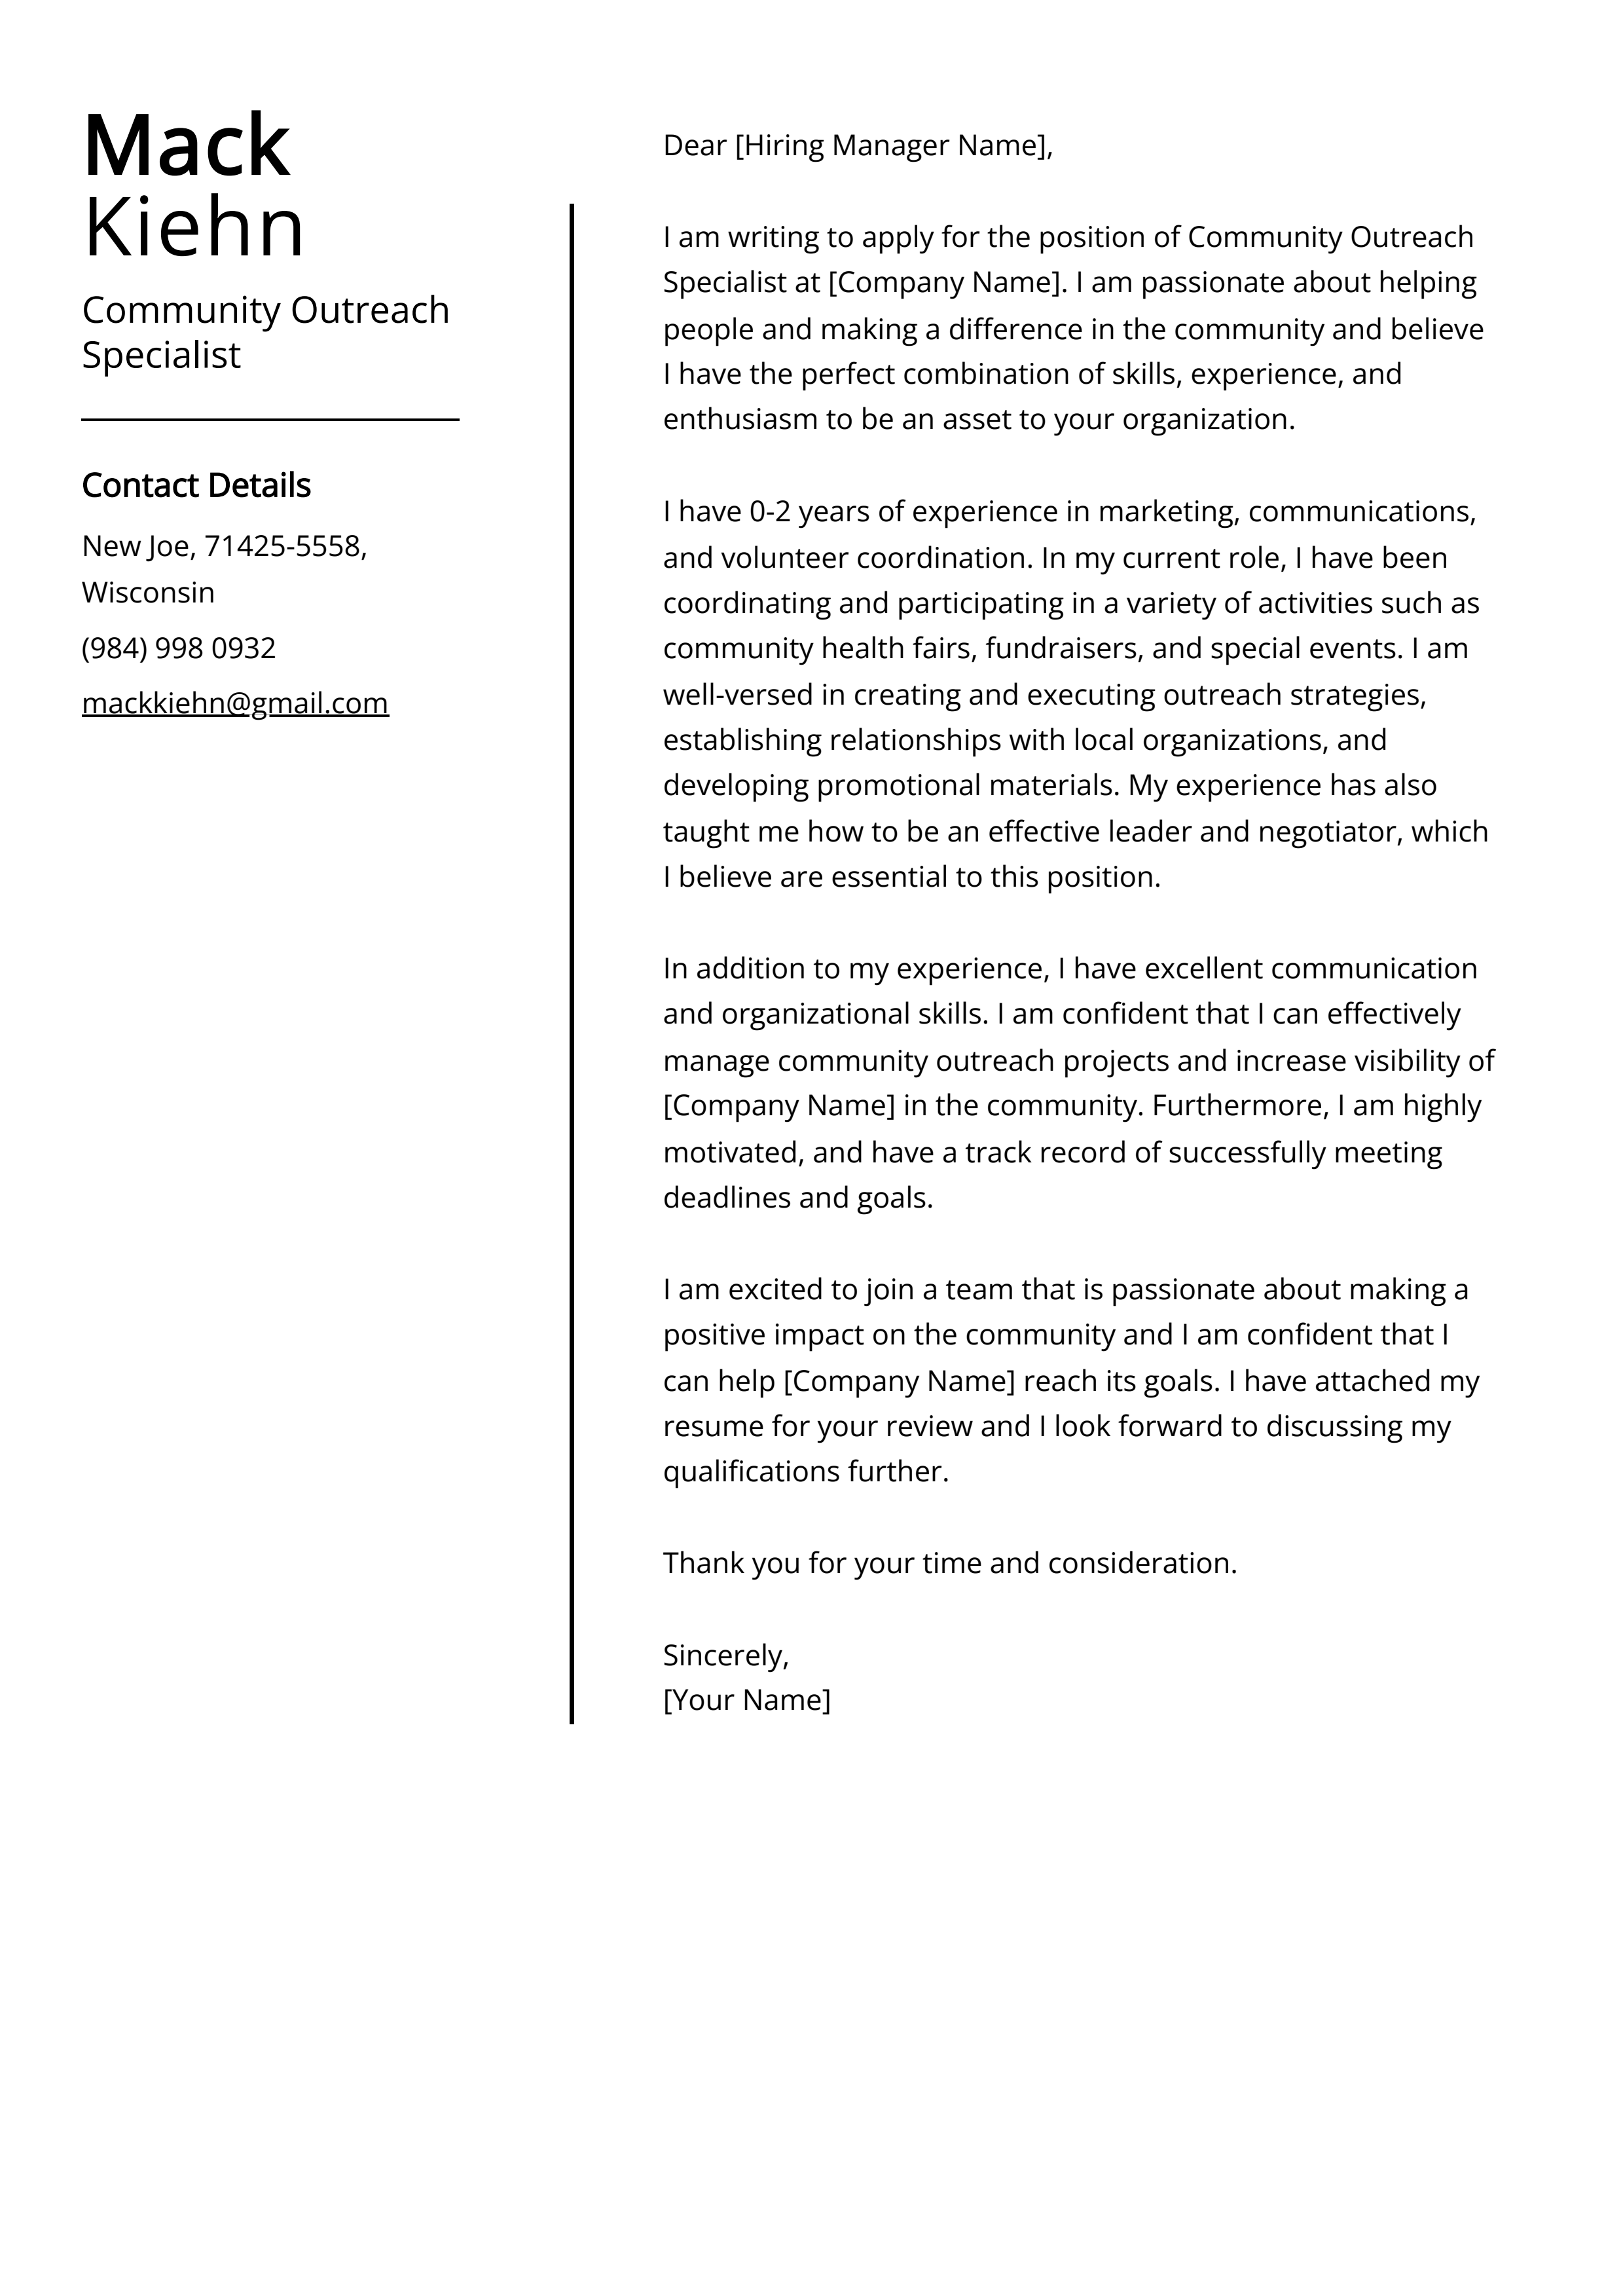 Community Outreach Specialist Cover Letter Example